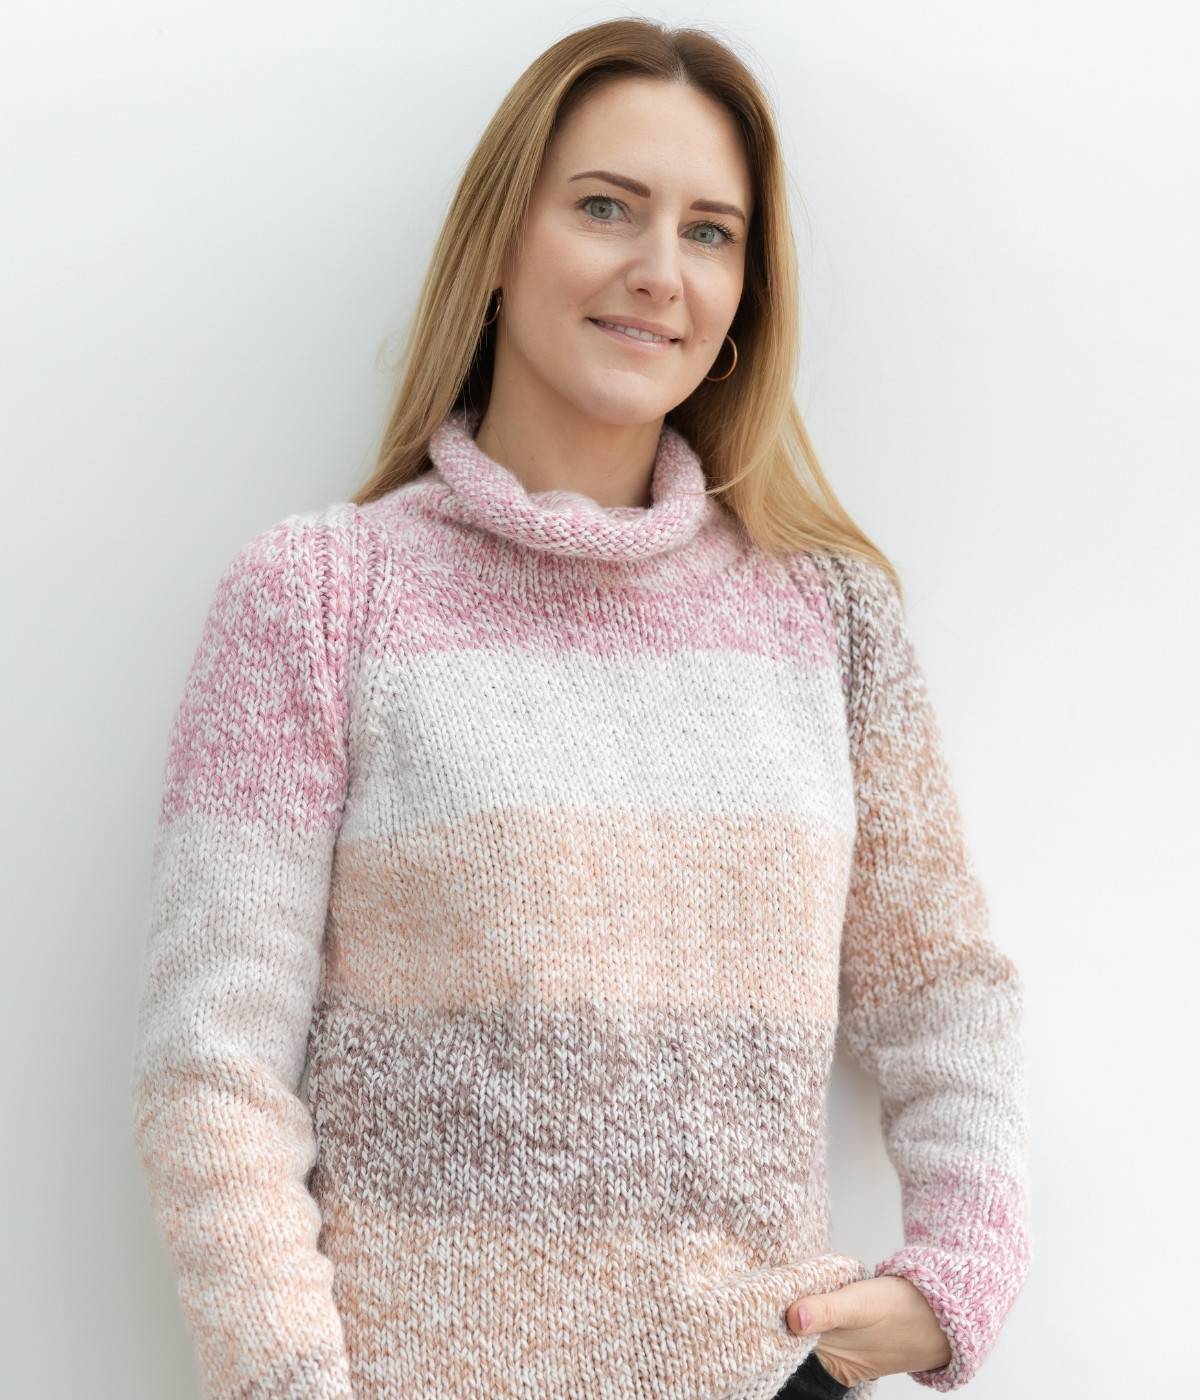 Roll Neck Raglan Sweater in Elements Canvas Cakes XL | The Knitting Network